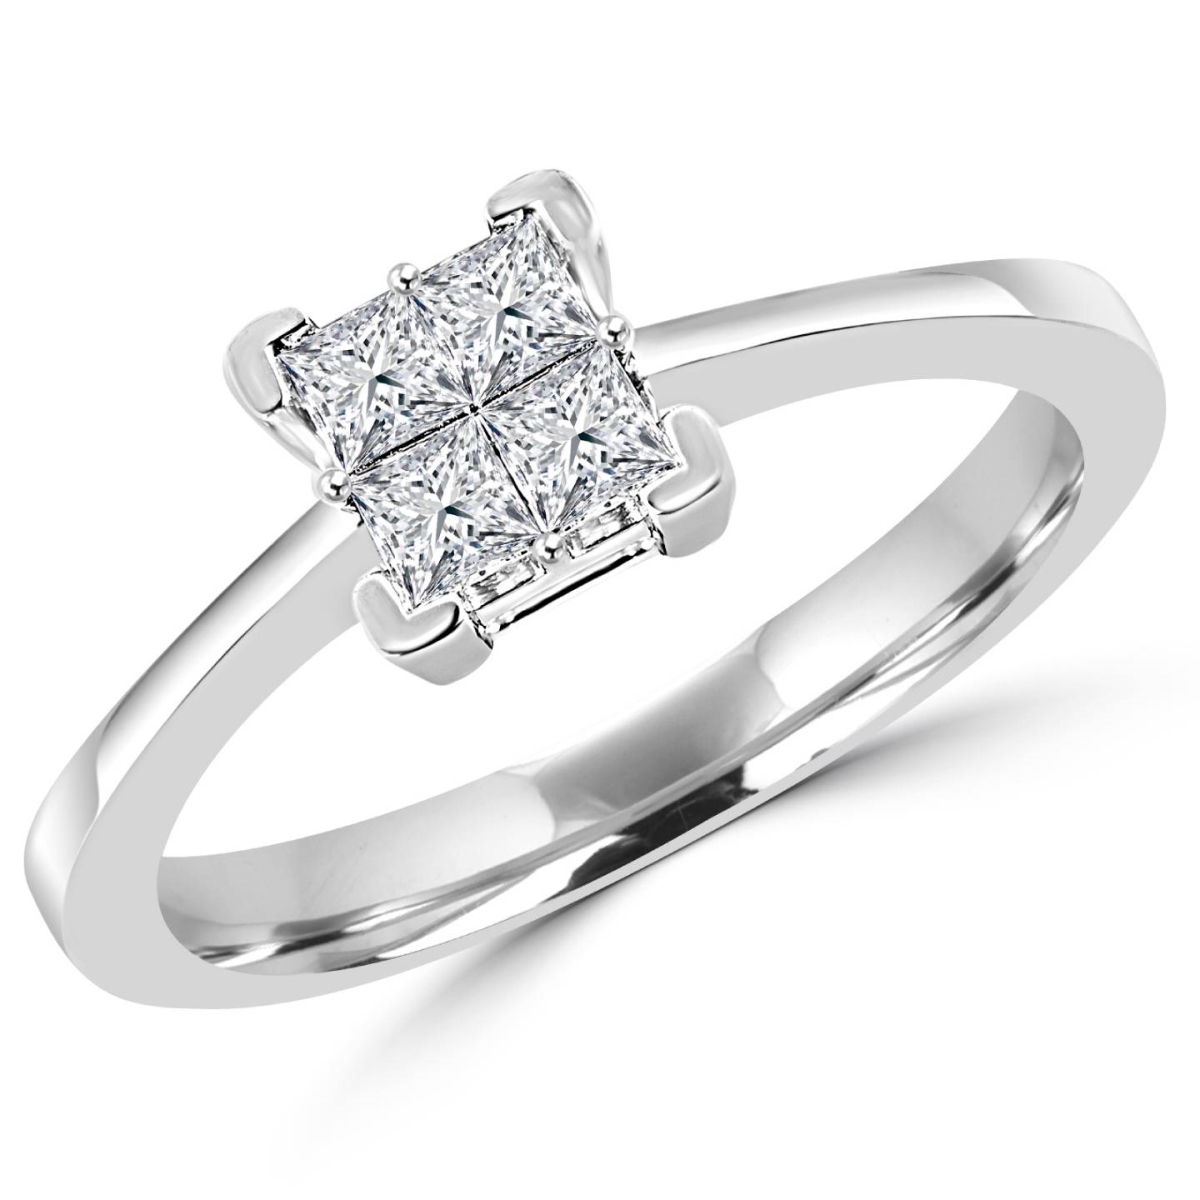 Picture of Majesty Diamonds MDR140108-9 0.38 CTW Invisible-Set Princess Cut Diamond Engagement Promise Ring in 14K White Gold - Size 9